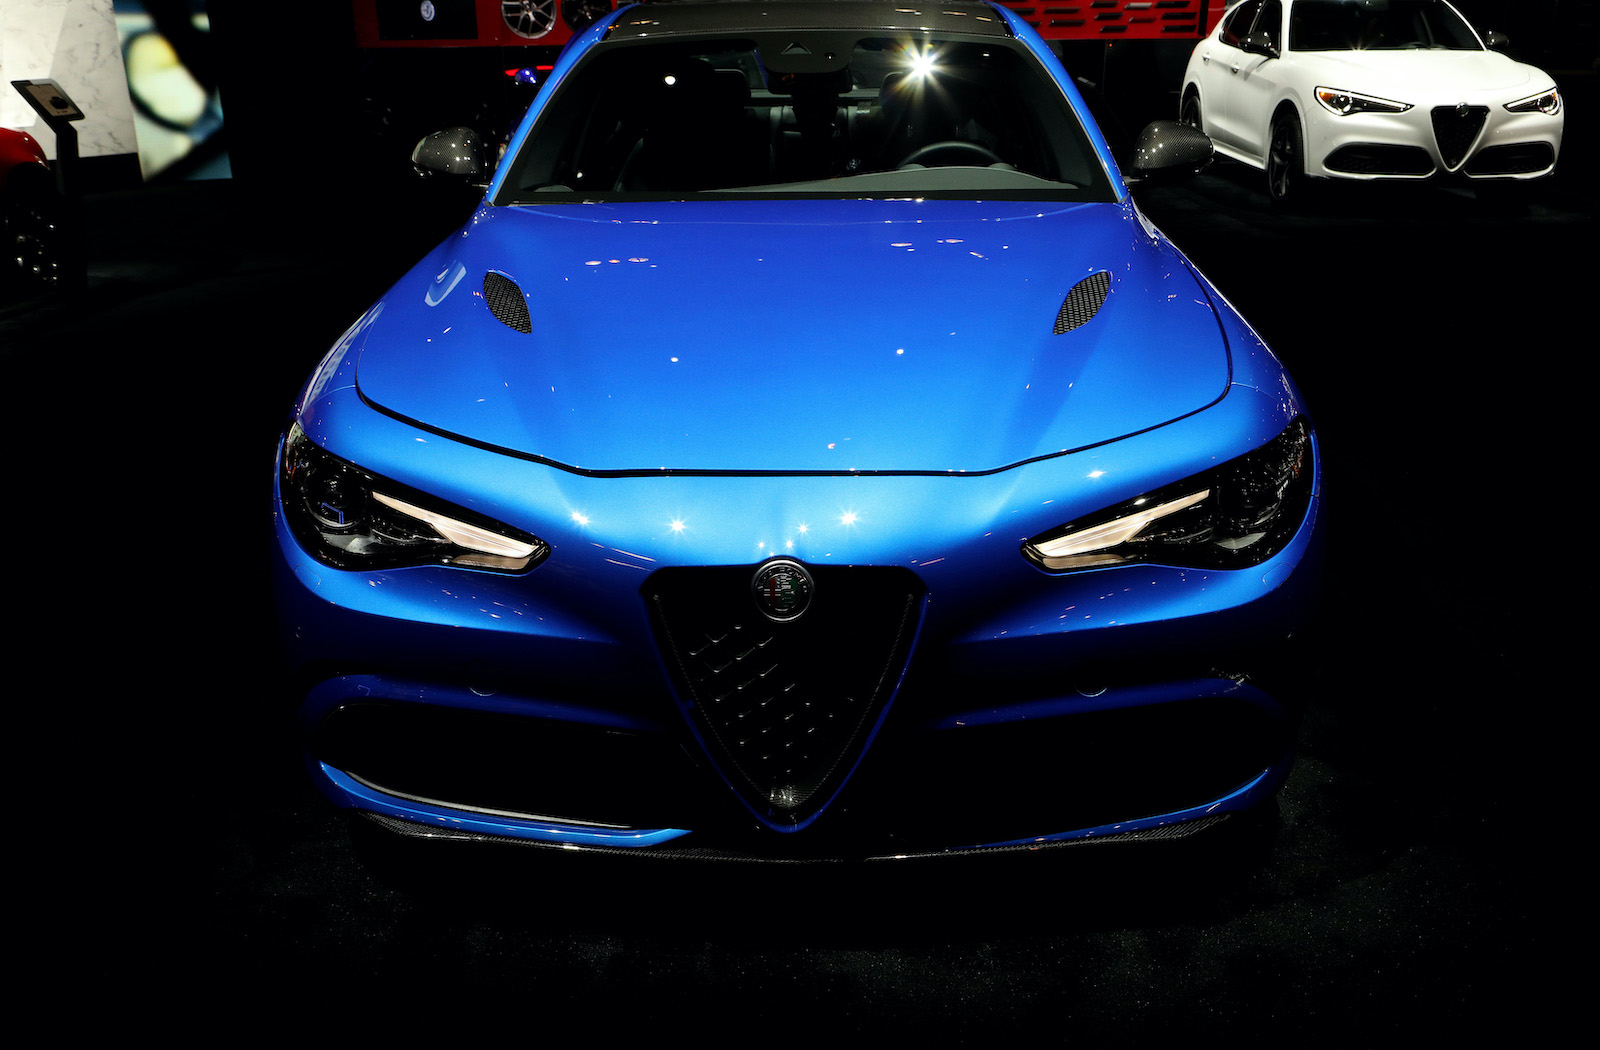 2020 Alfa Romeo Giulia is on display at the 112th Annual Chicago Auto Show at McCormick Place